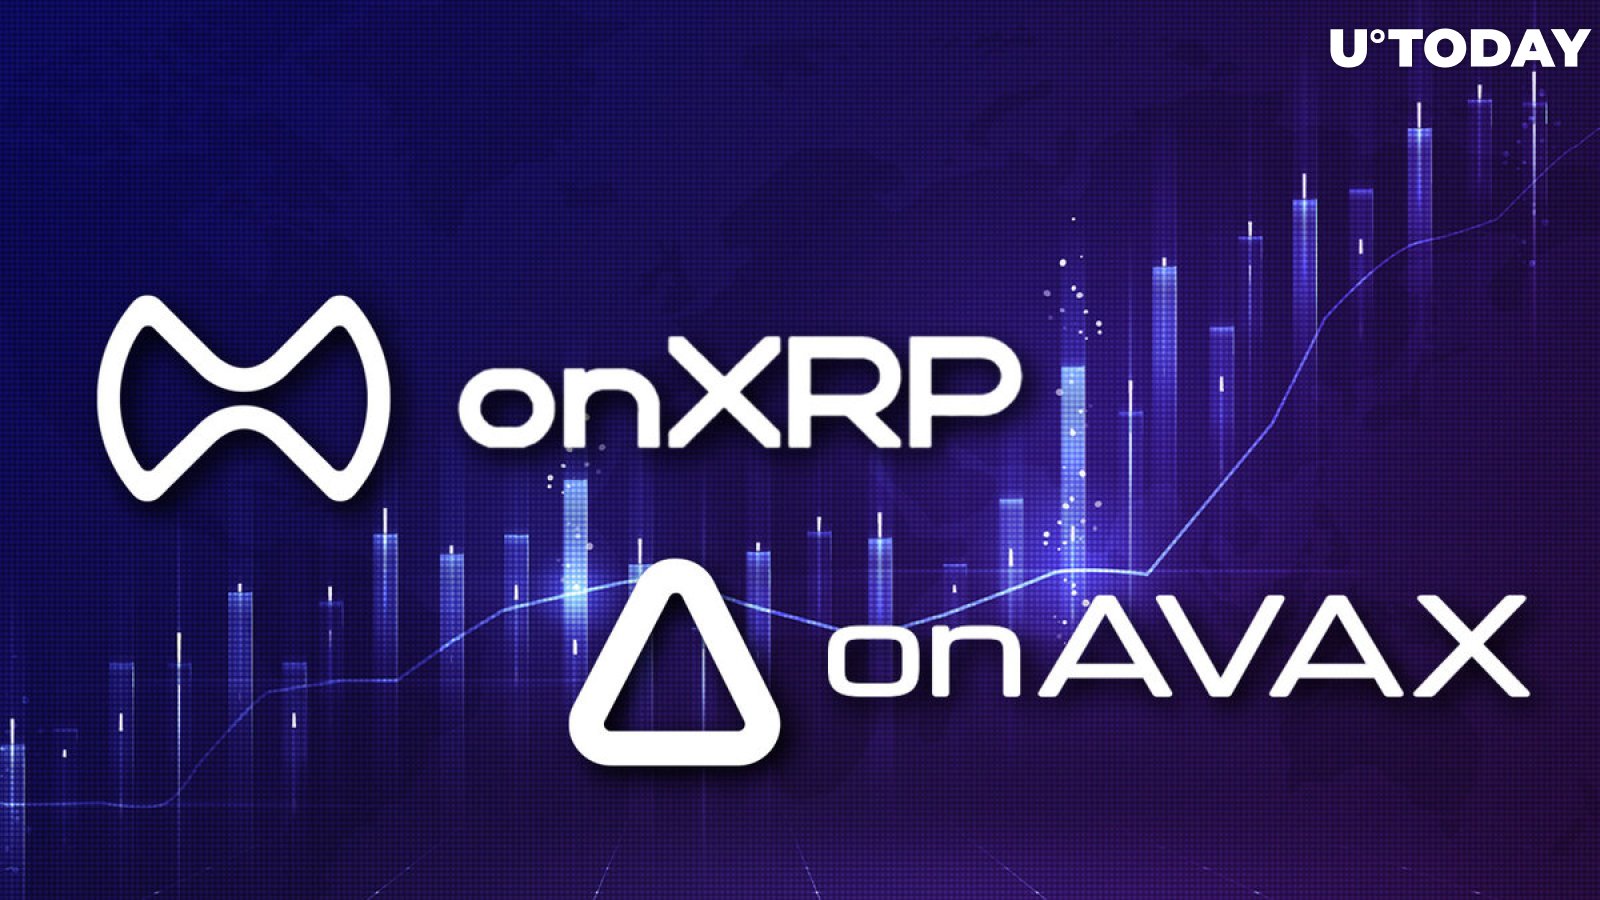 This XRP Ledger Coin Is up 25% in Week, What's Known About onAVAX (OVX)?